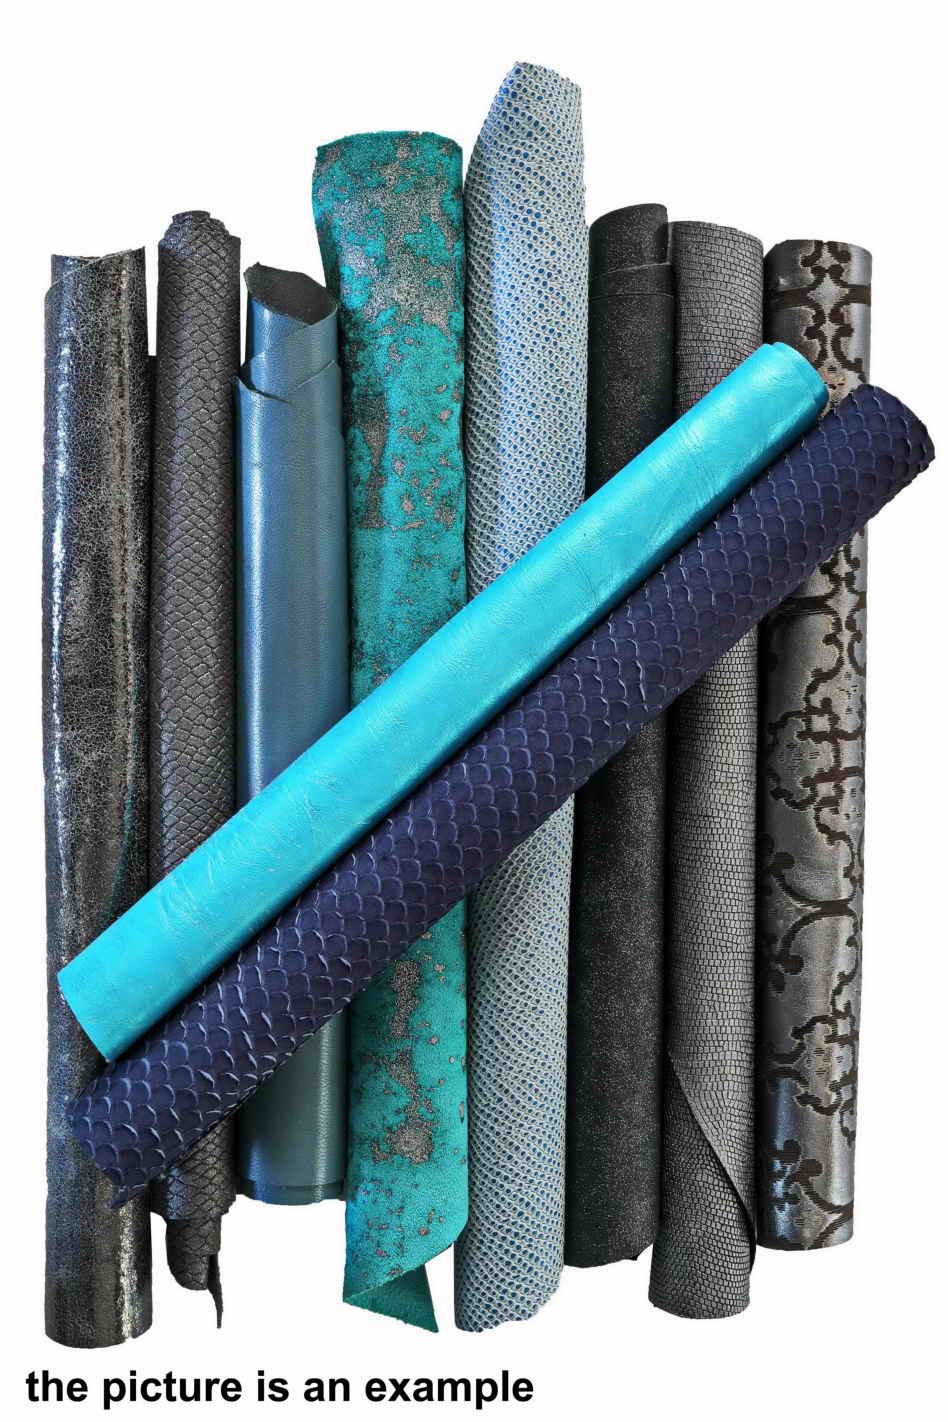 Mix leather scraps - BLUE and GREY - fancy textures, prints and softness  various, 10 or 15 italian leather pieces for crafts